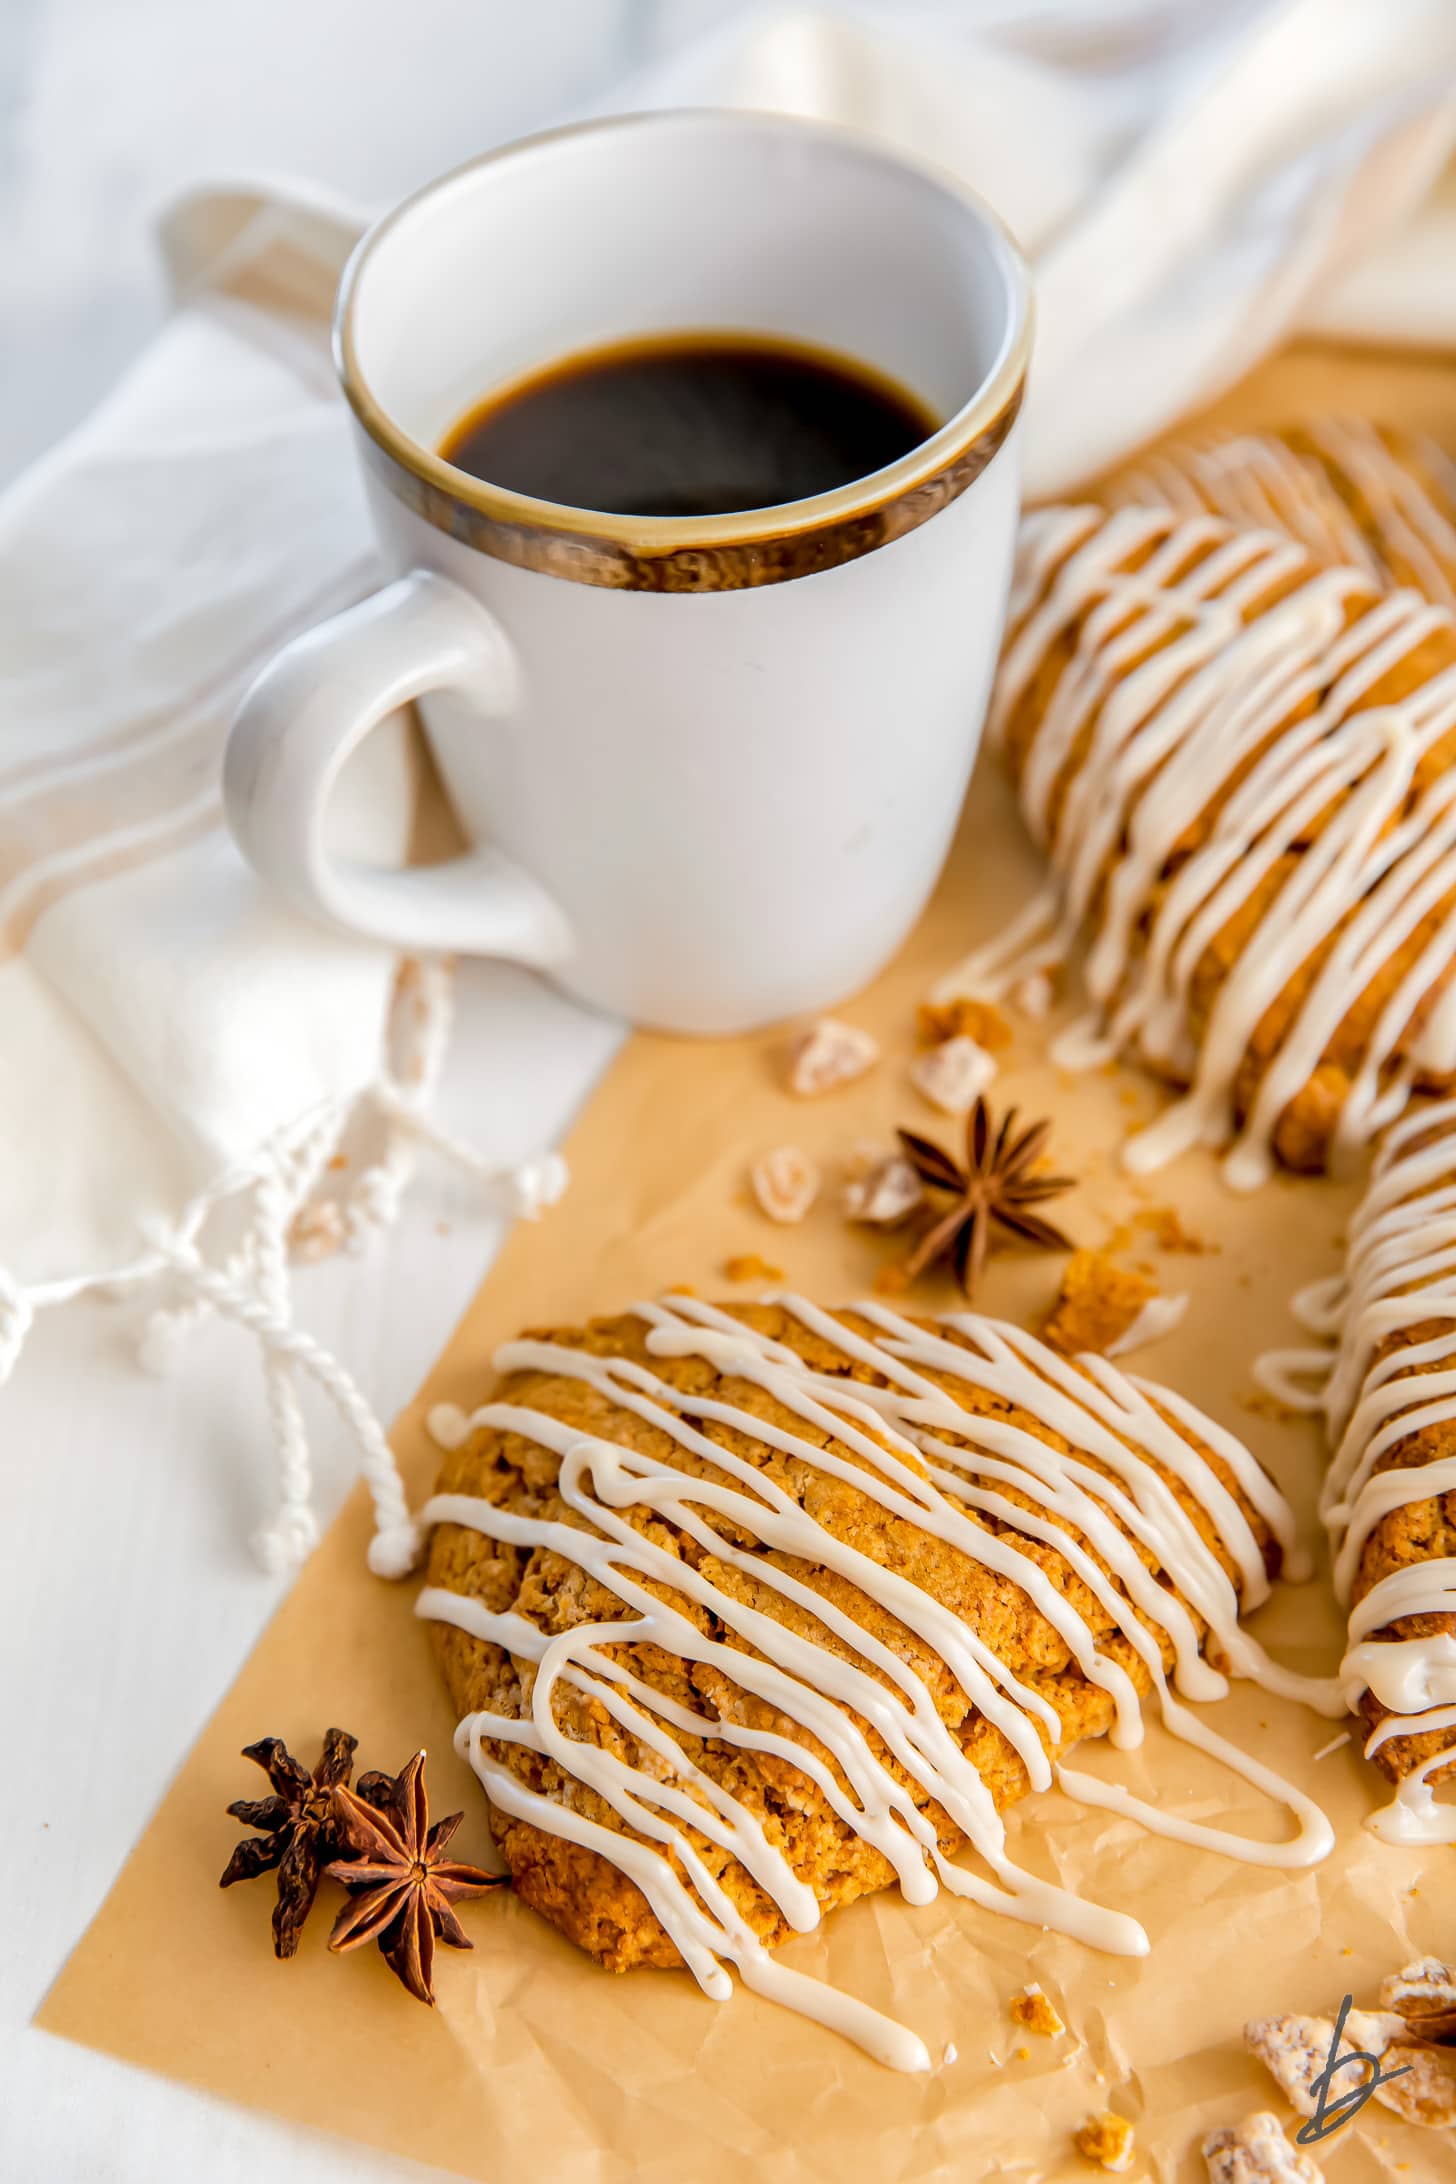 gingerbread scone with maple glaze on parchment paper next to anise star and white mug of coffee